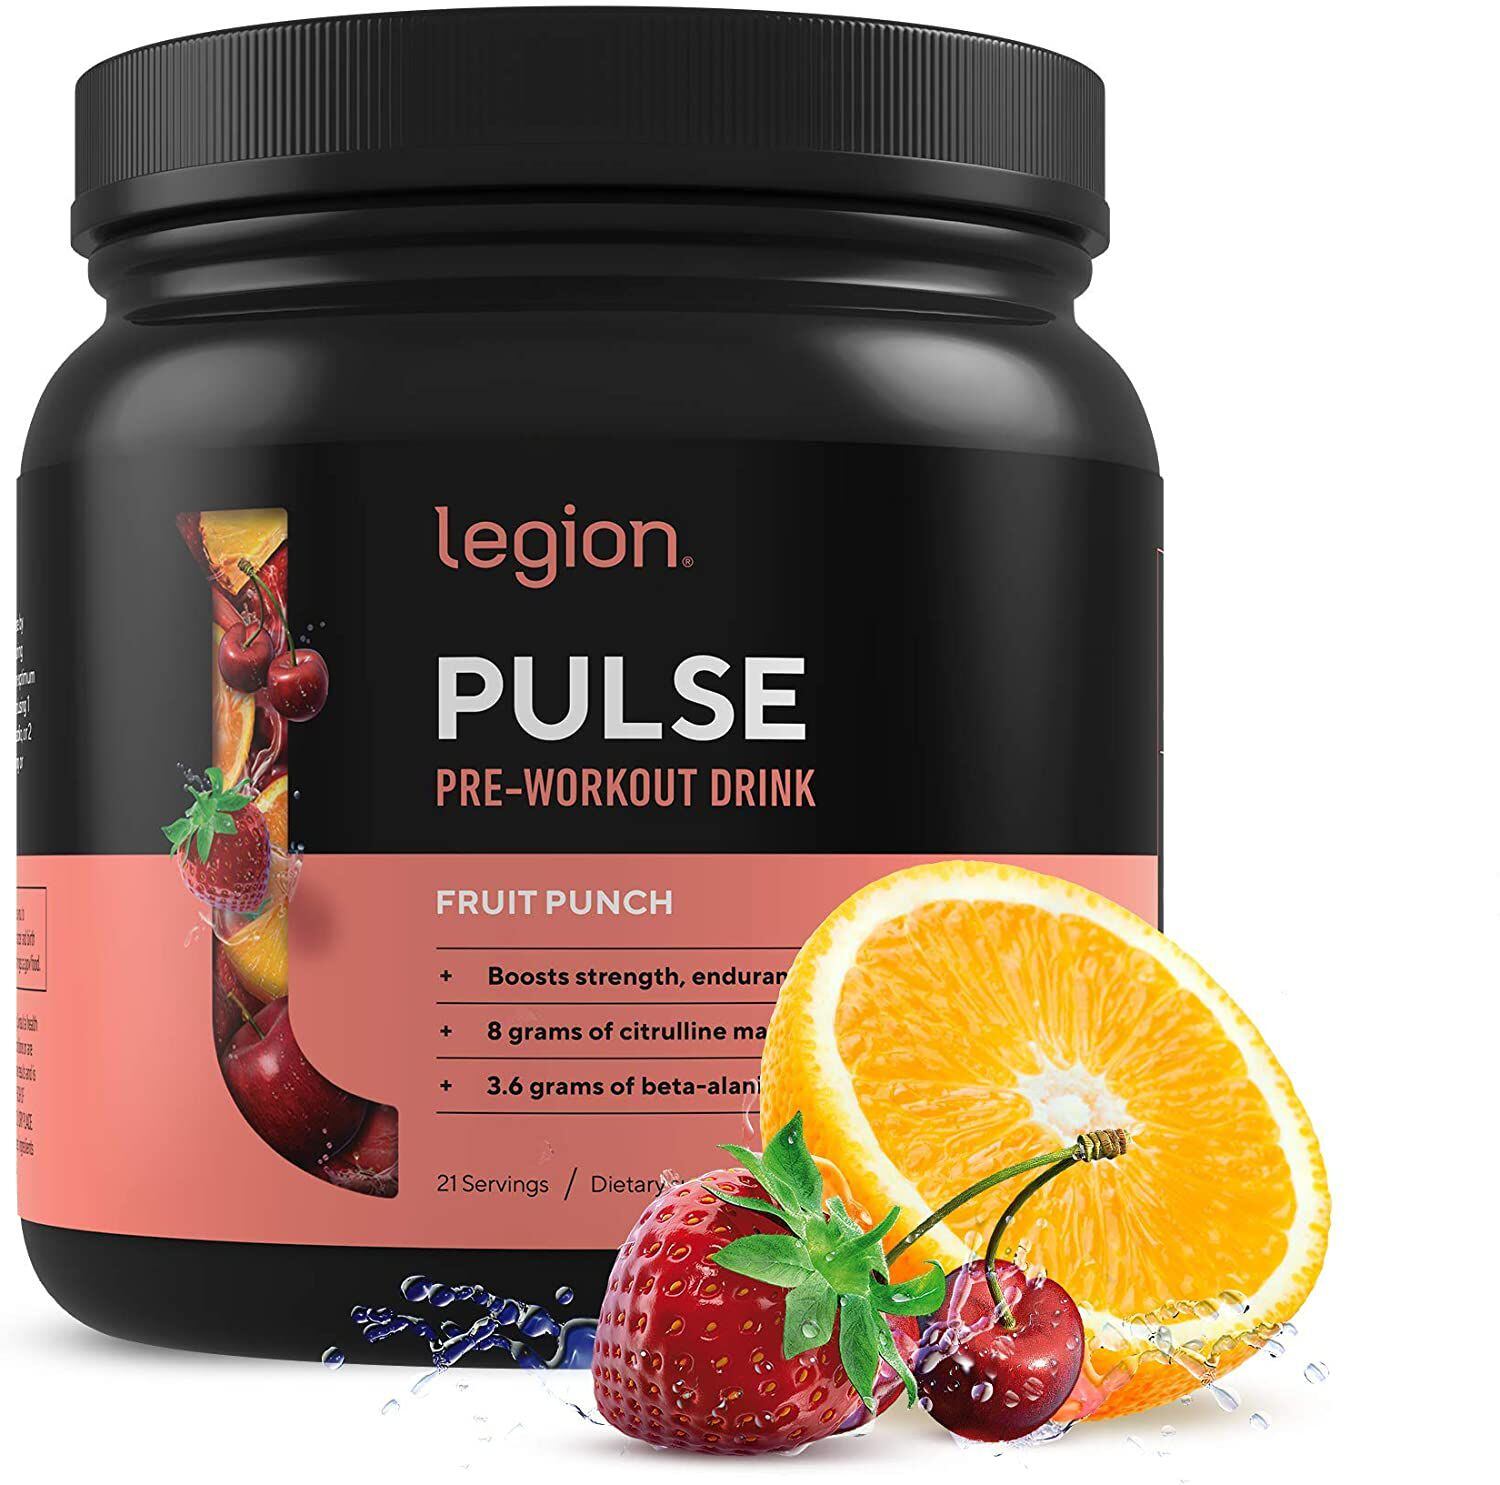 Legion Pulse product with fruits on black label